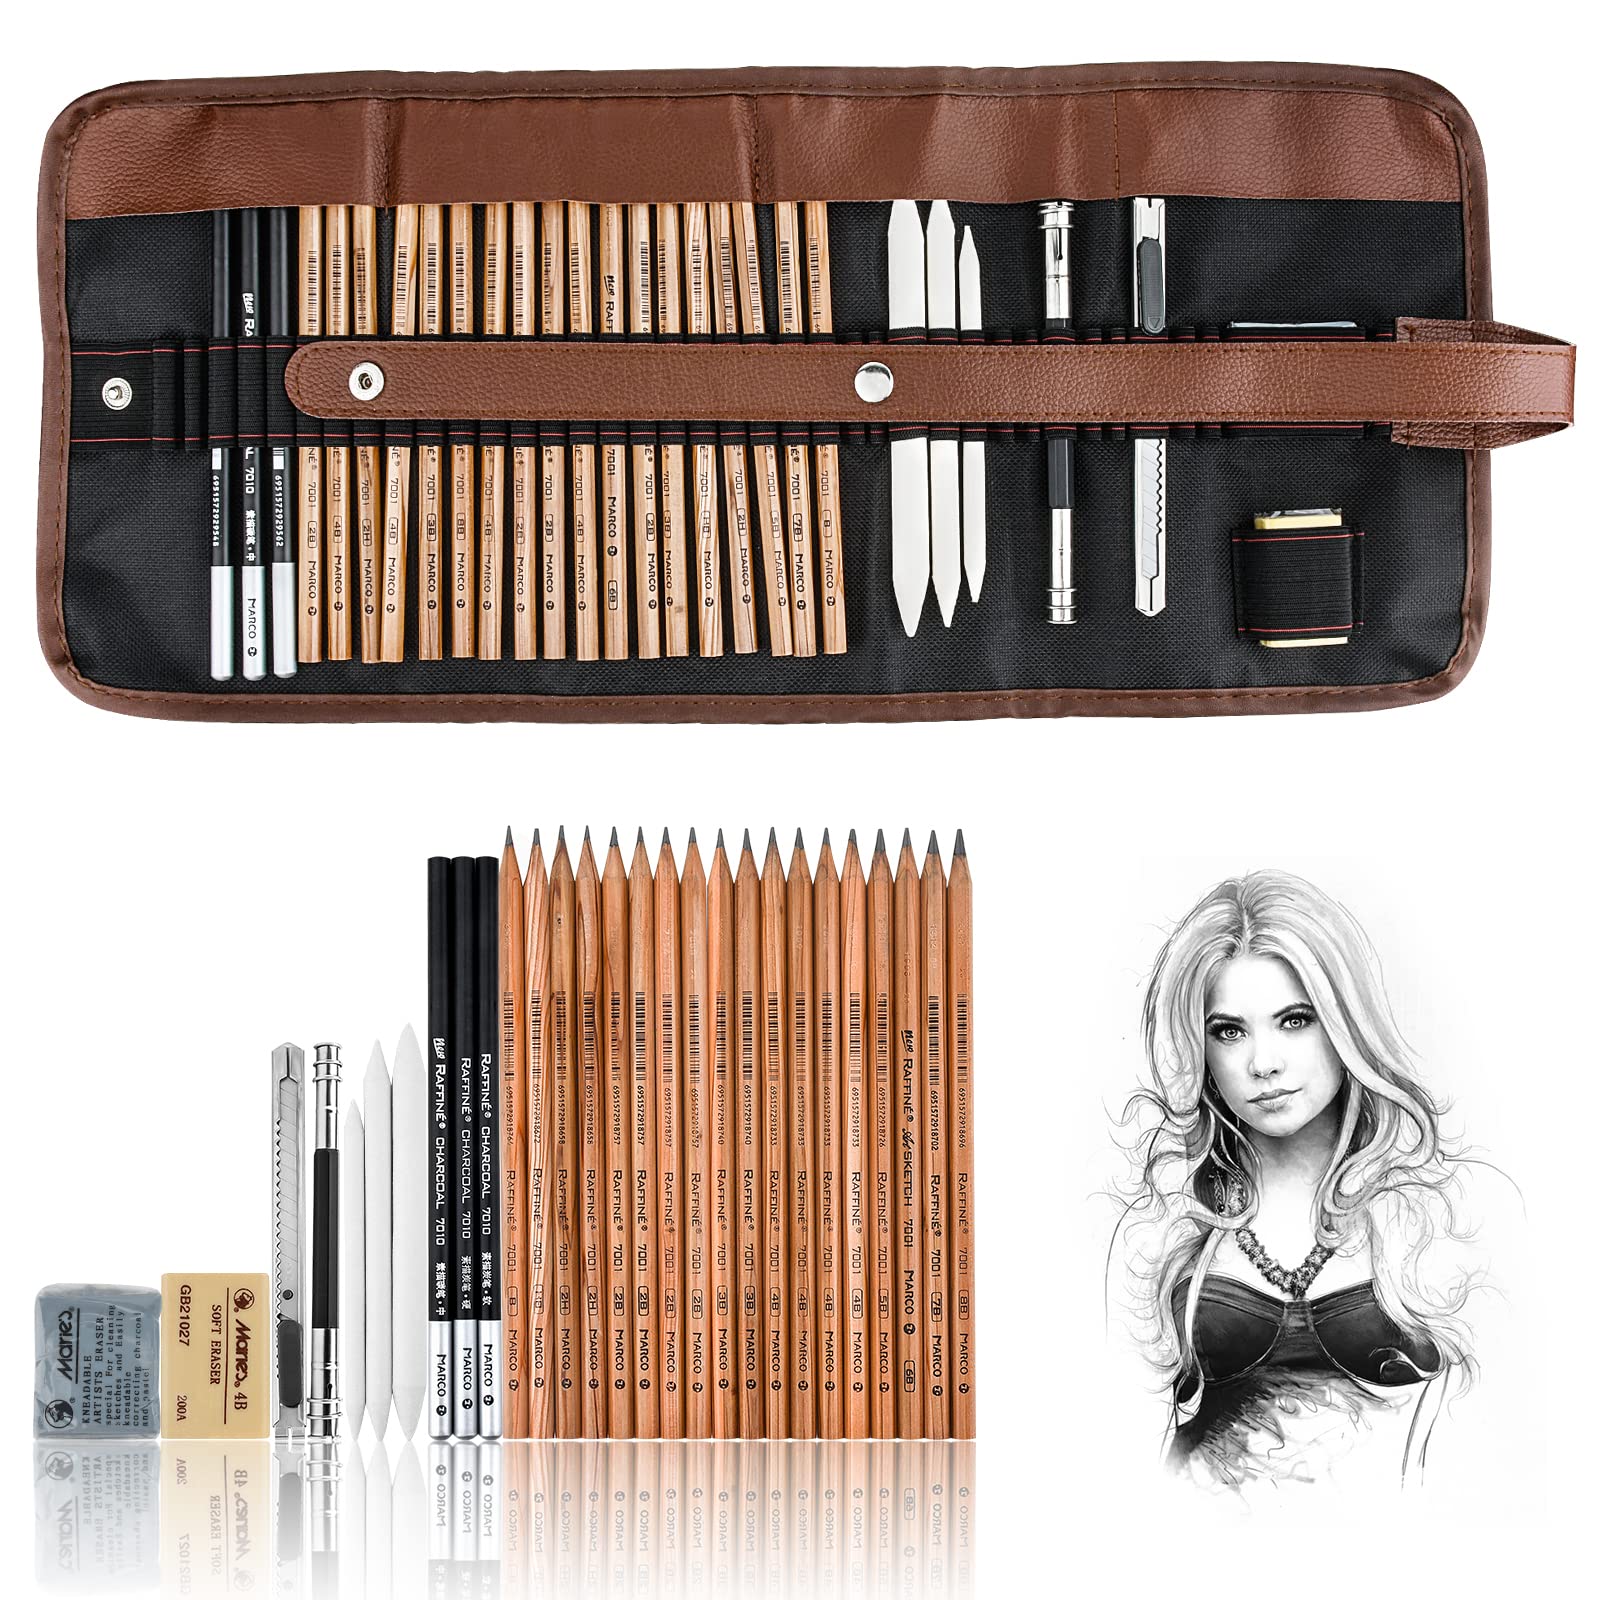  Typecho Sketching Drawing Art Set,58pcs Professional Wooden Artist  Kit with Sketchbook,Complete Sketching,Charcoal Pencils and Tools,Ideal for  Teens,Kids,Adults,Artists,Beginners(Wooden Case-58pcs) : Arts, Crafts &  Sewing